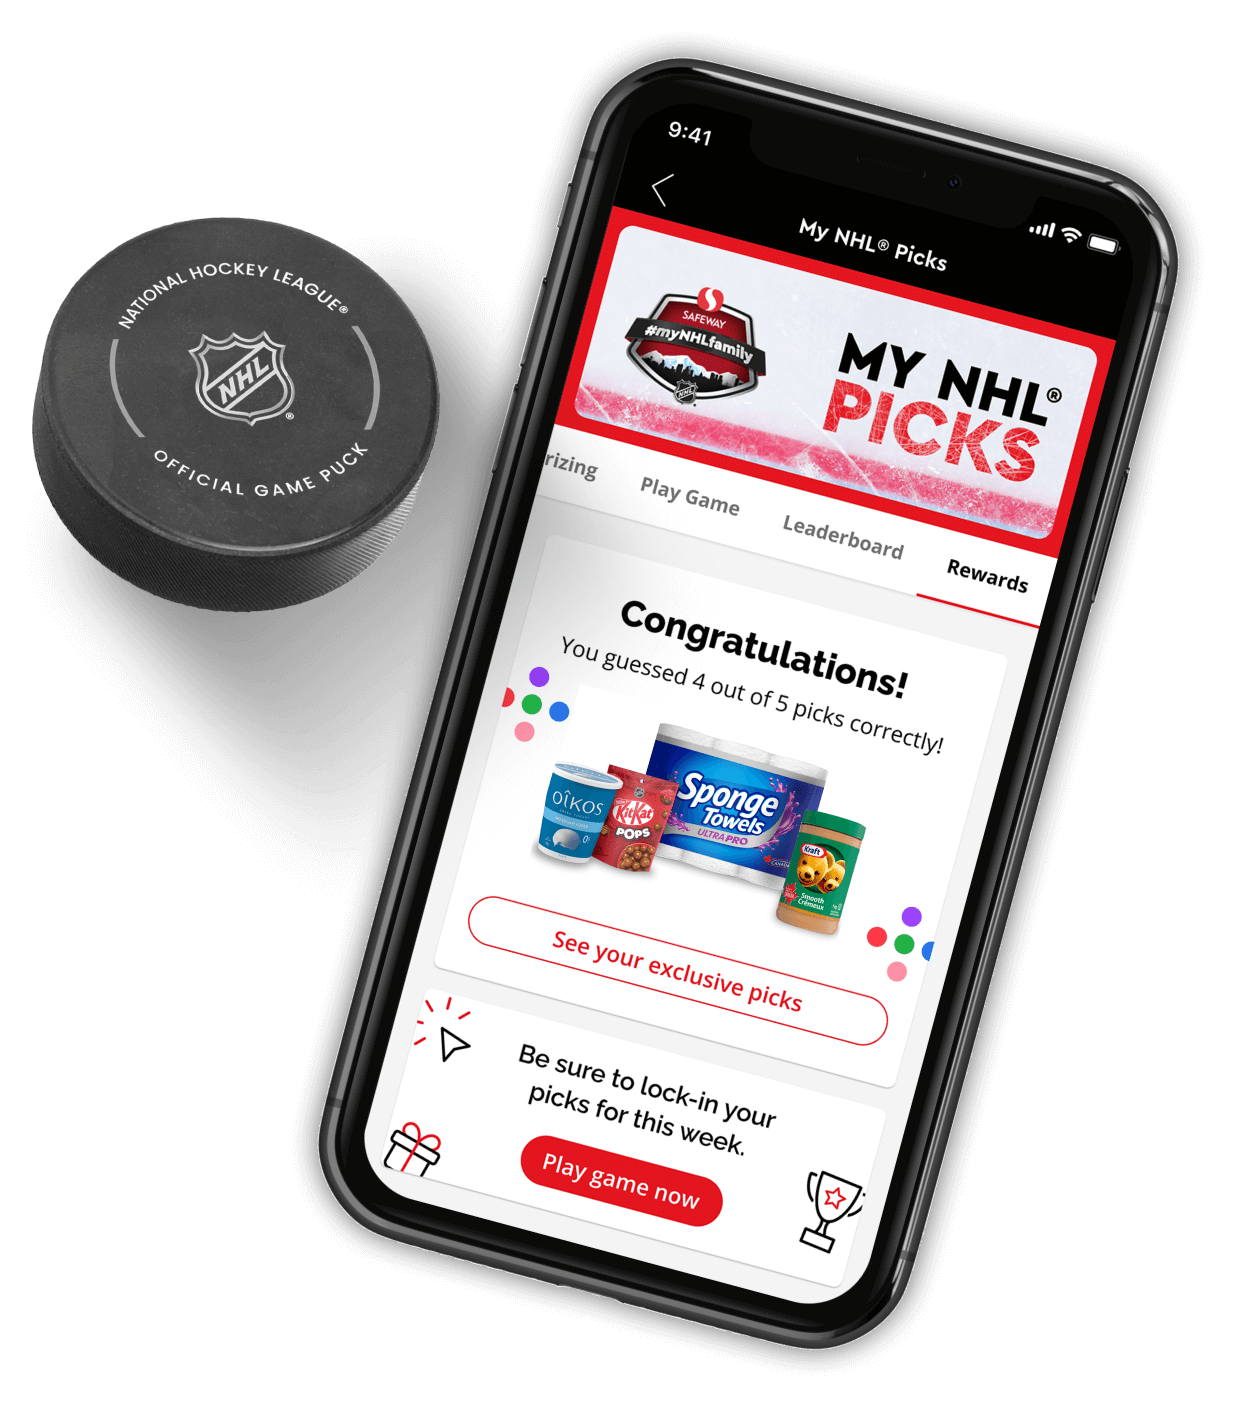 An image showing the Safeway My NHL PICKS App running on a smartphone with rewards section.